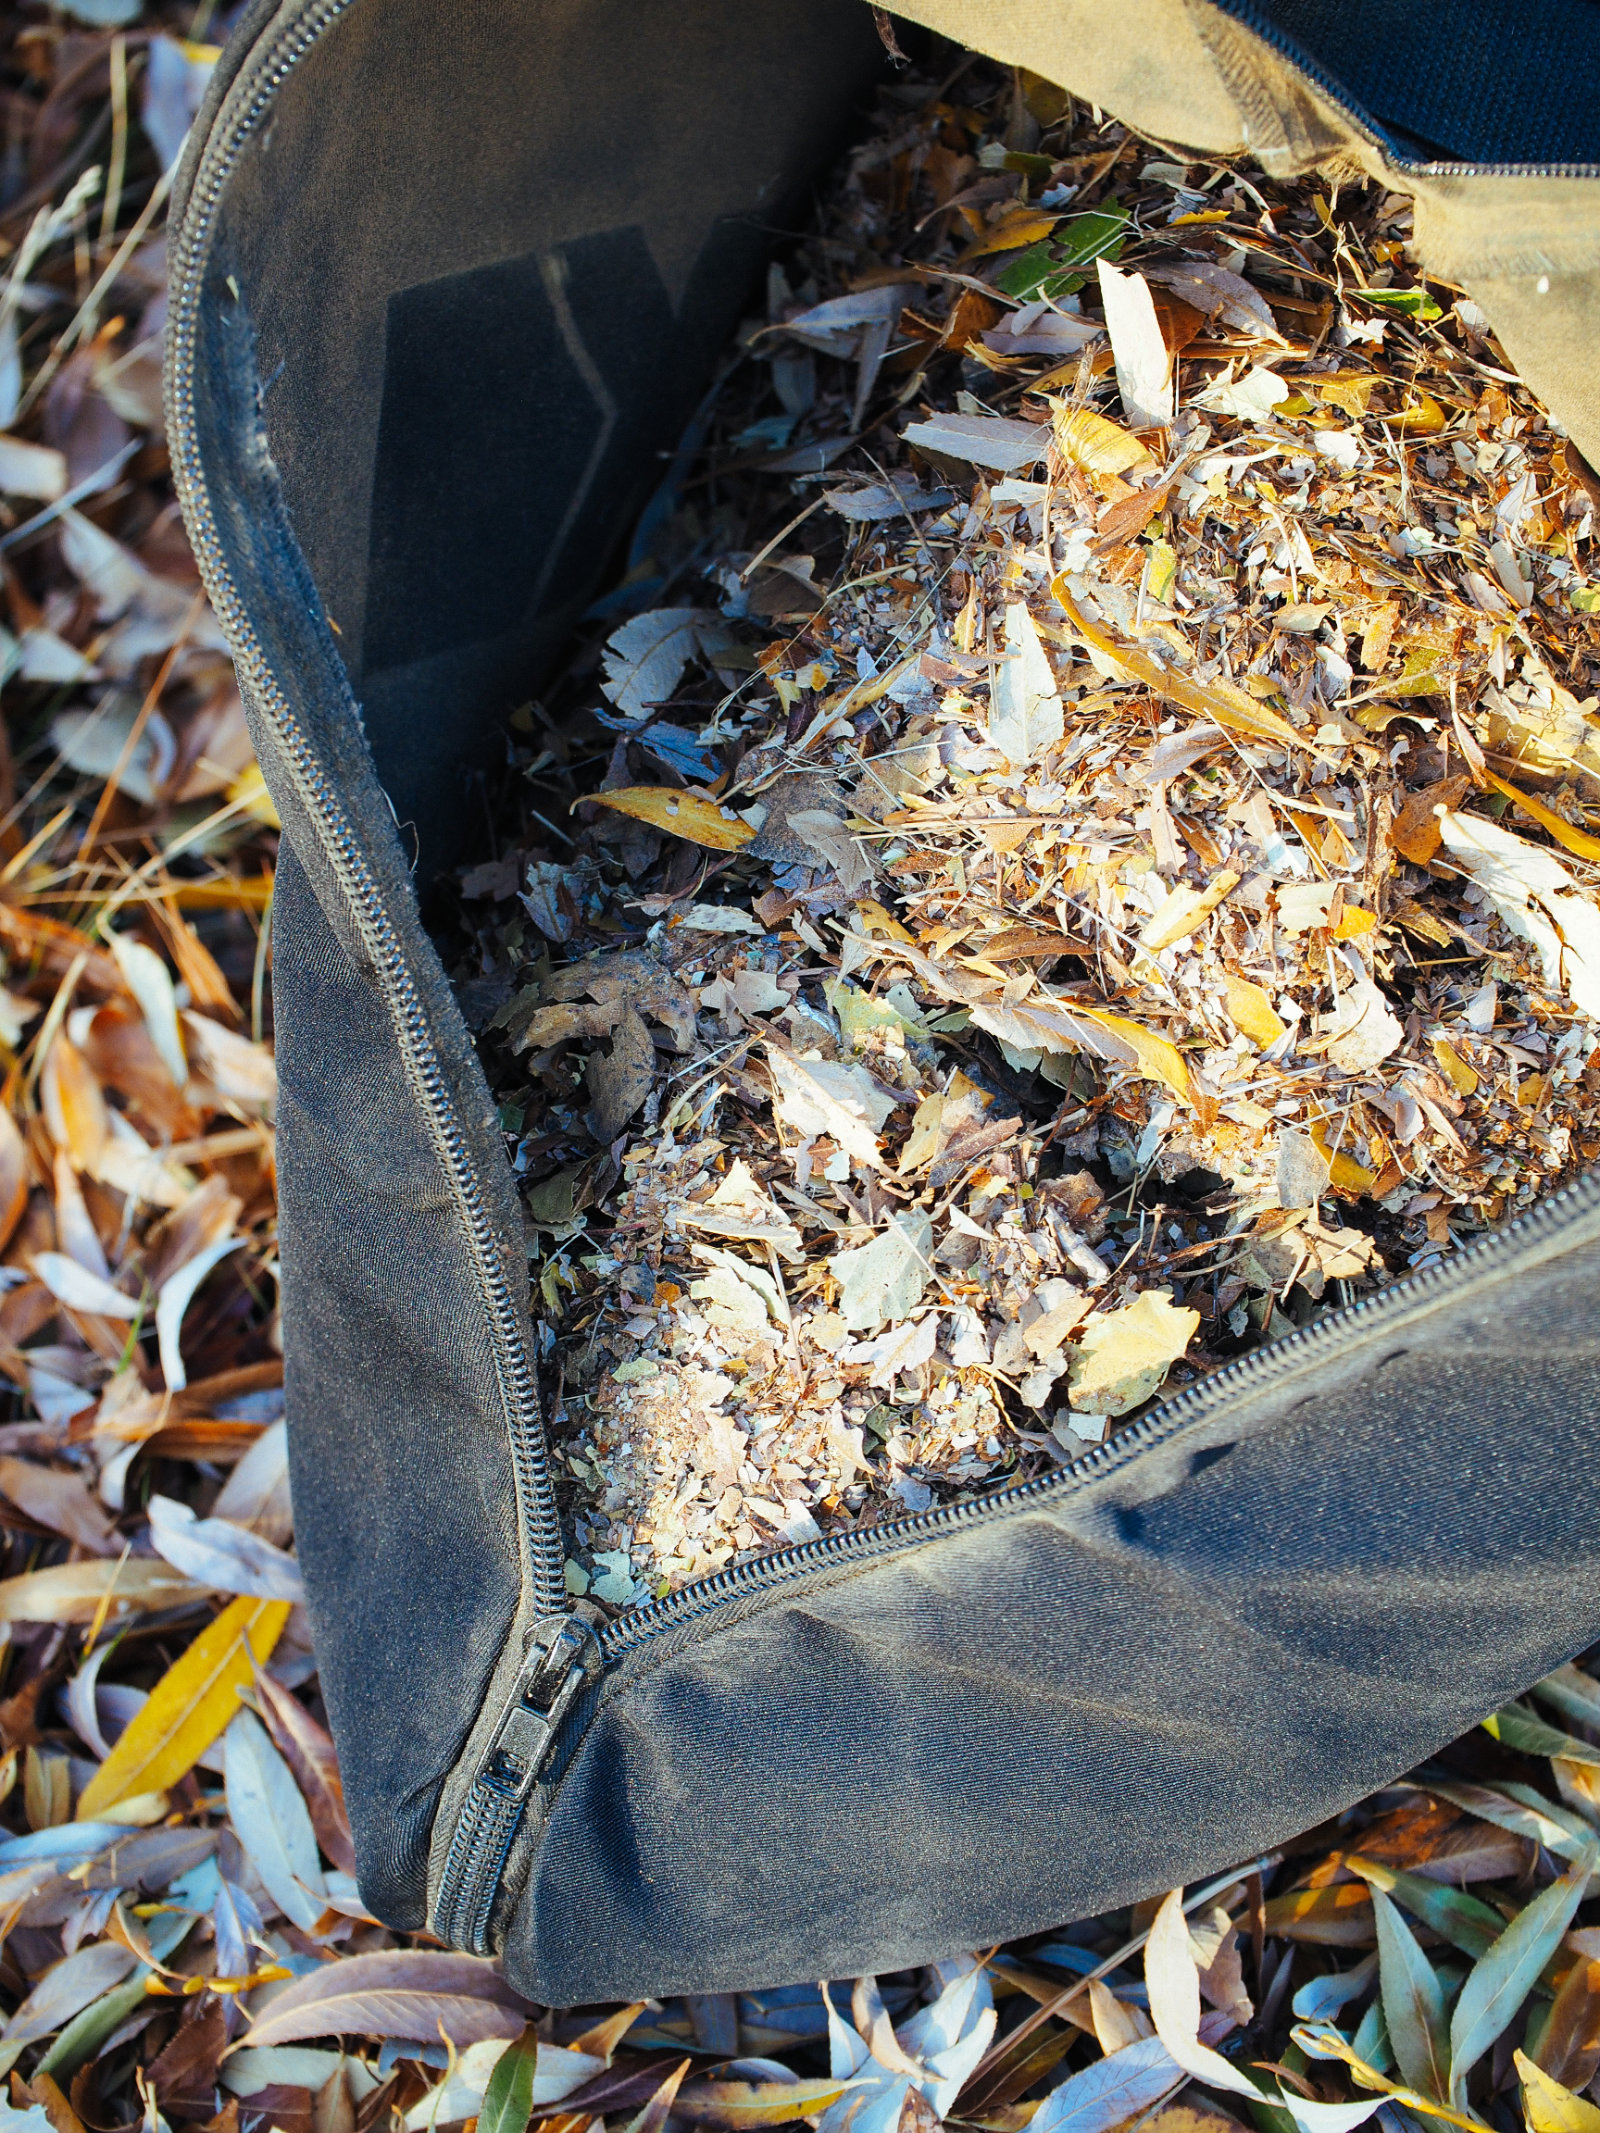 Finely mulched leaves and twigs